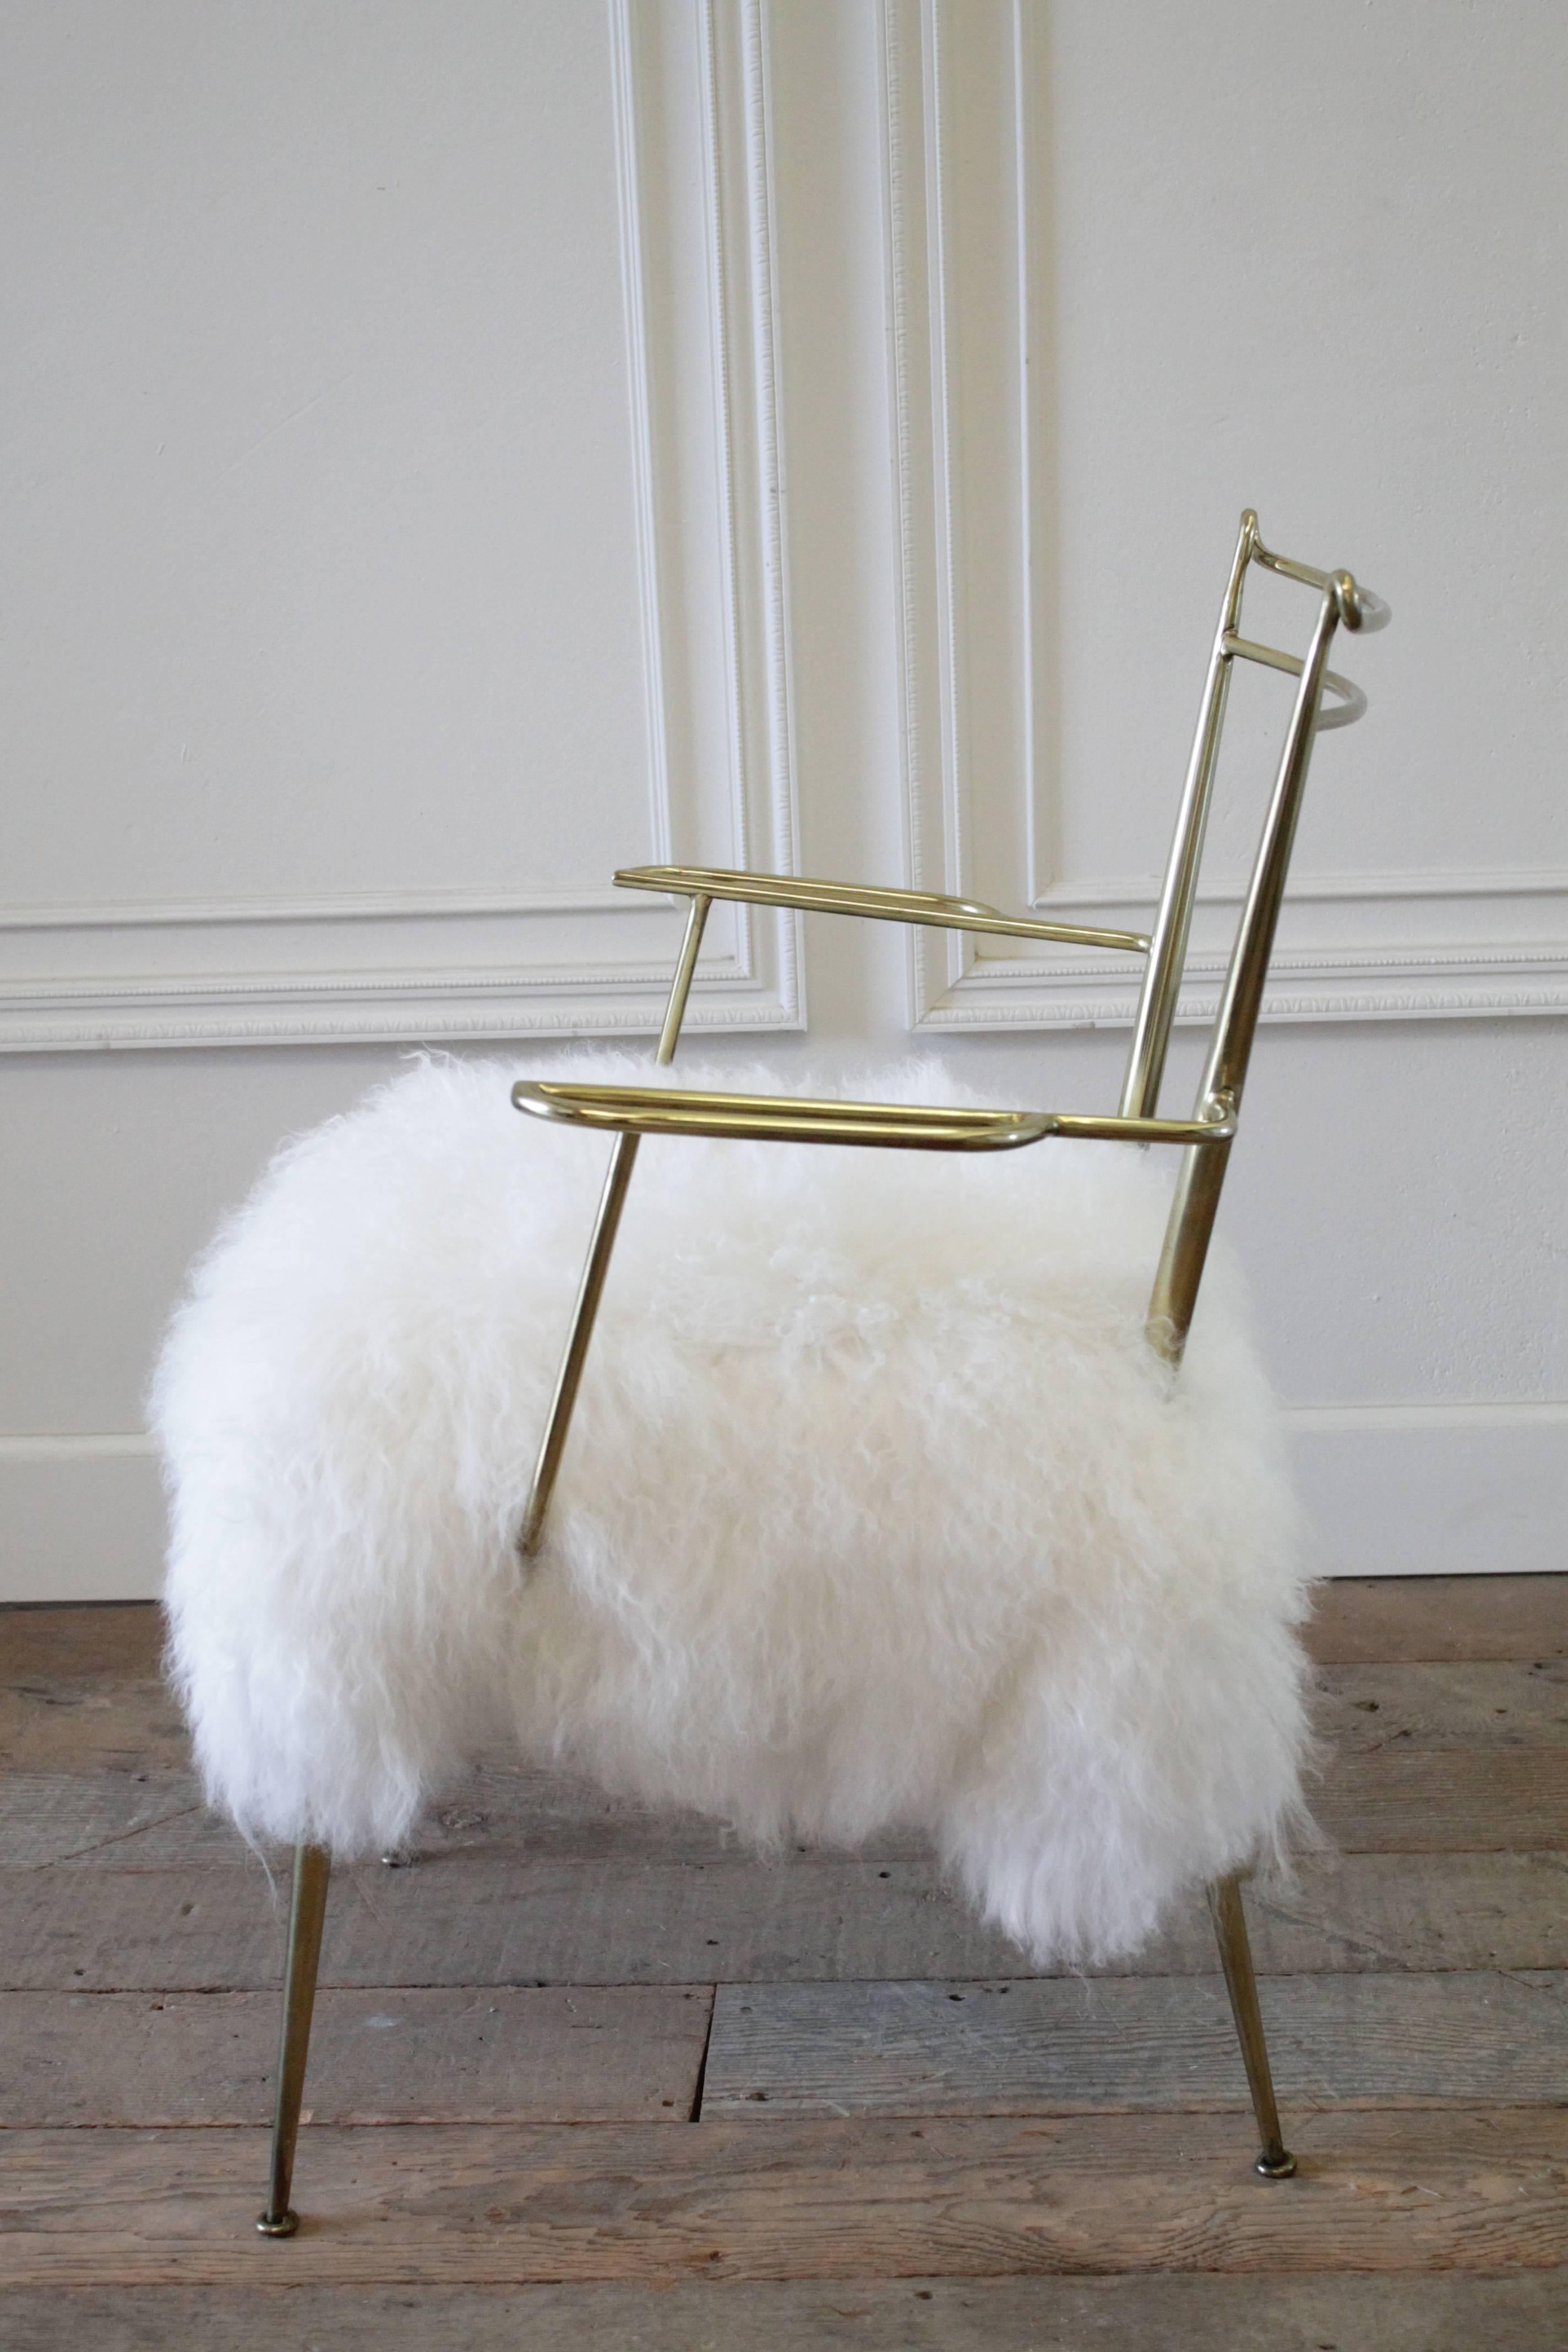 20th Century Vintage Brass Chair with Lambswool Upholstered Seat